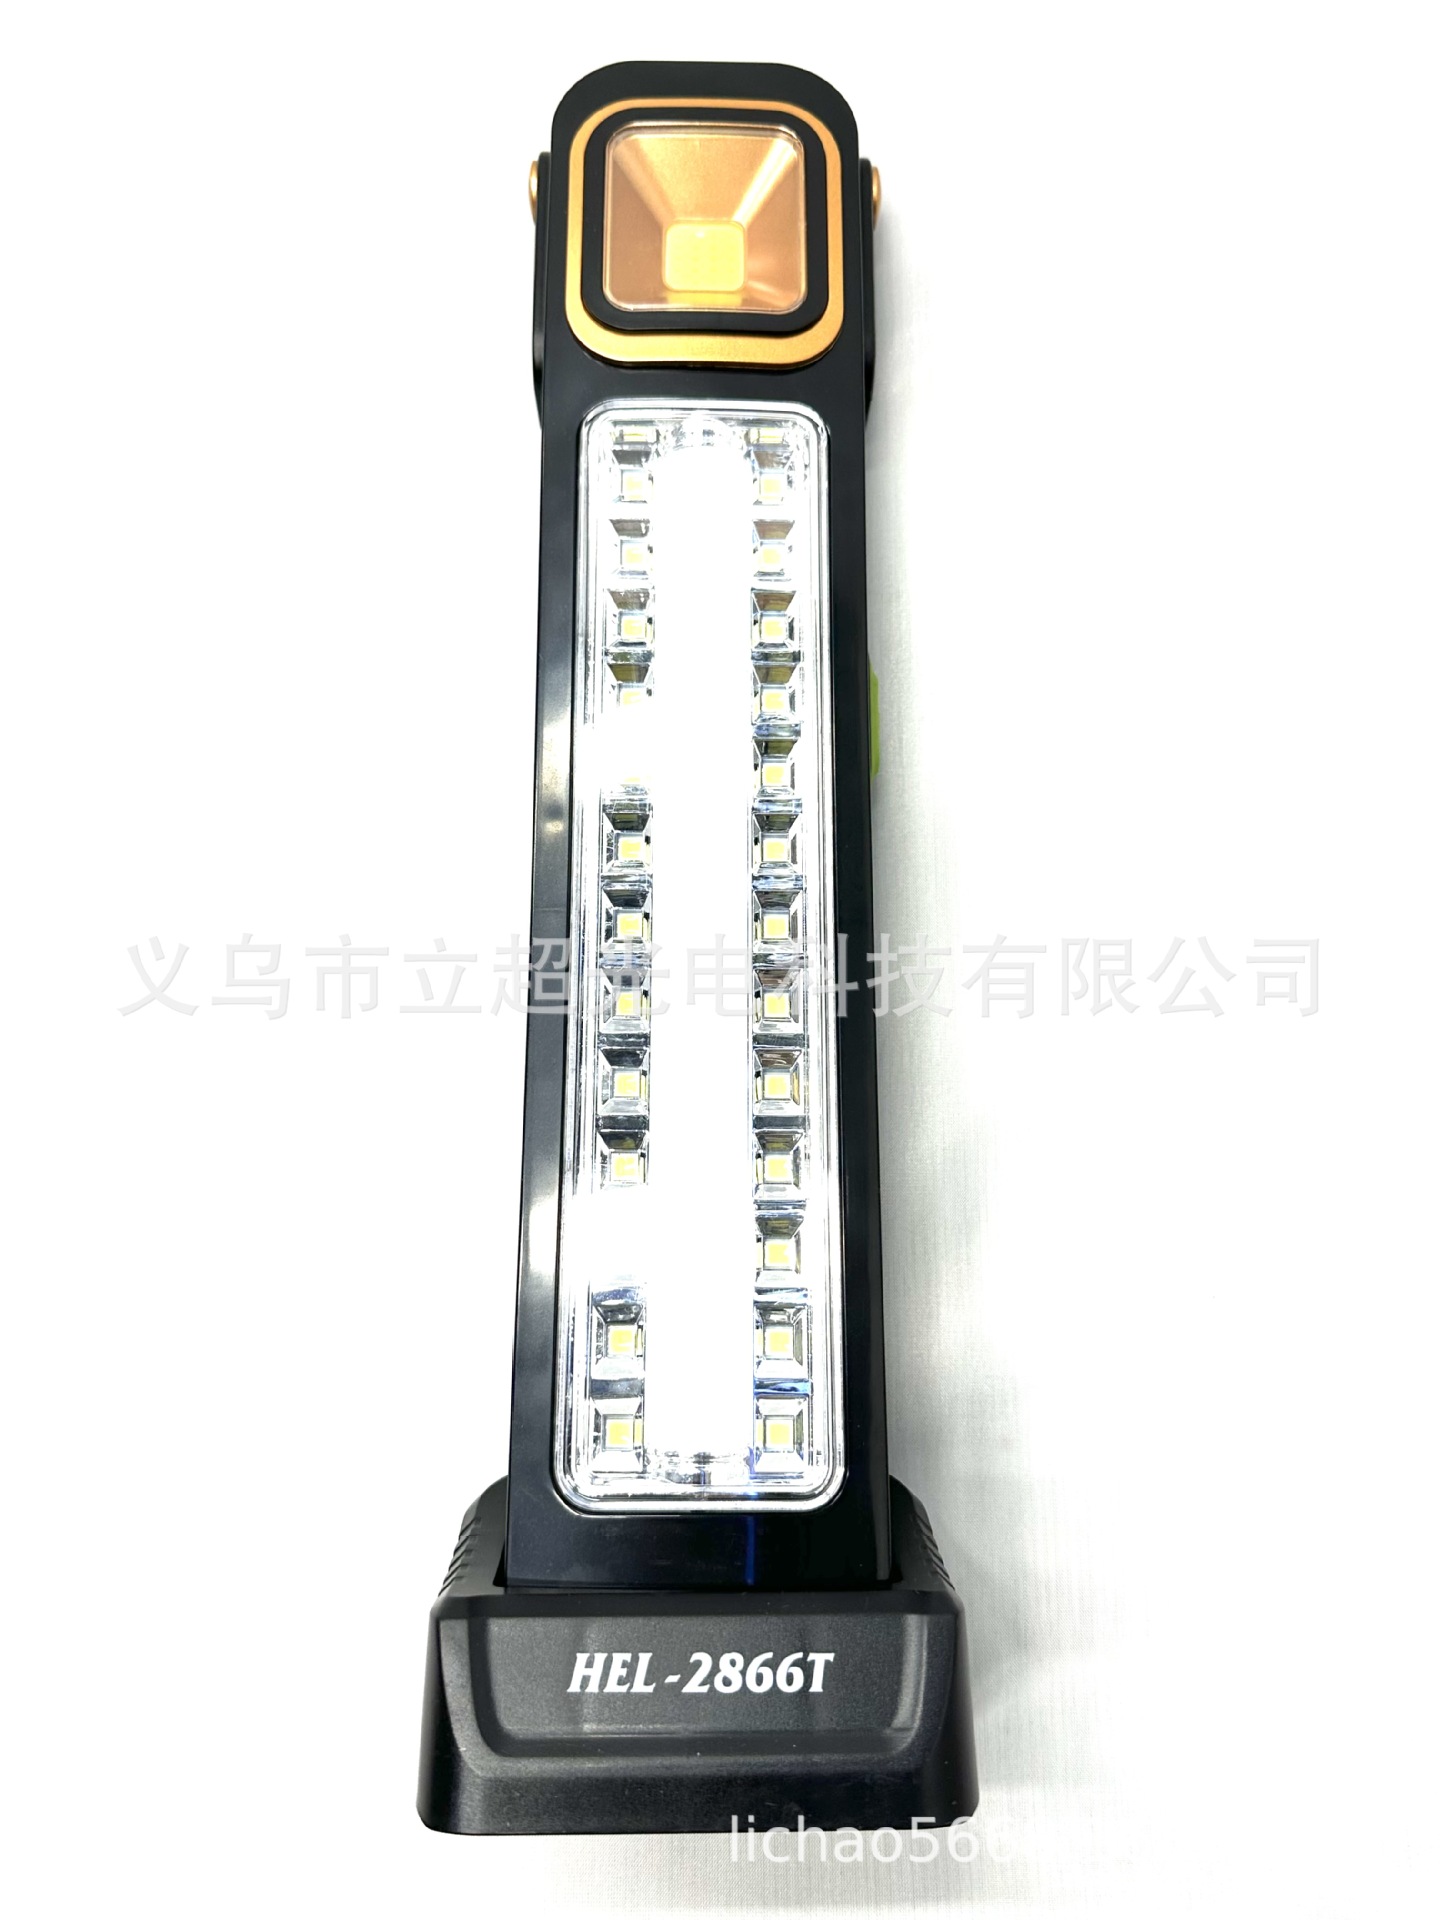 New Solar Emergency Lamp Fire Portable Super Bright Long Shot Charging Fast Battery Life